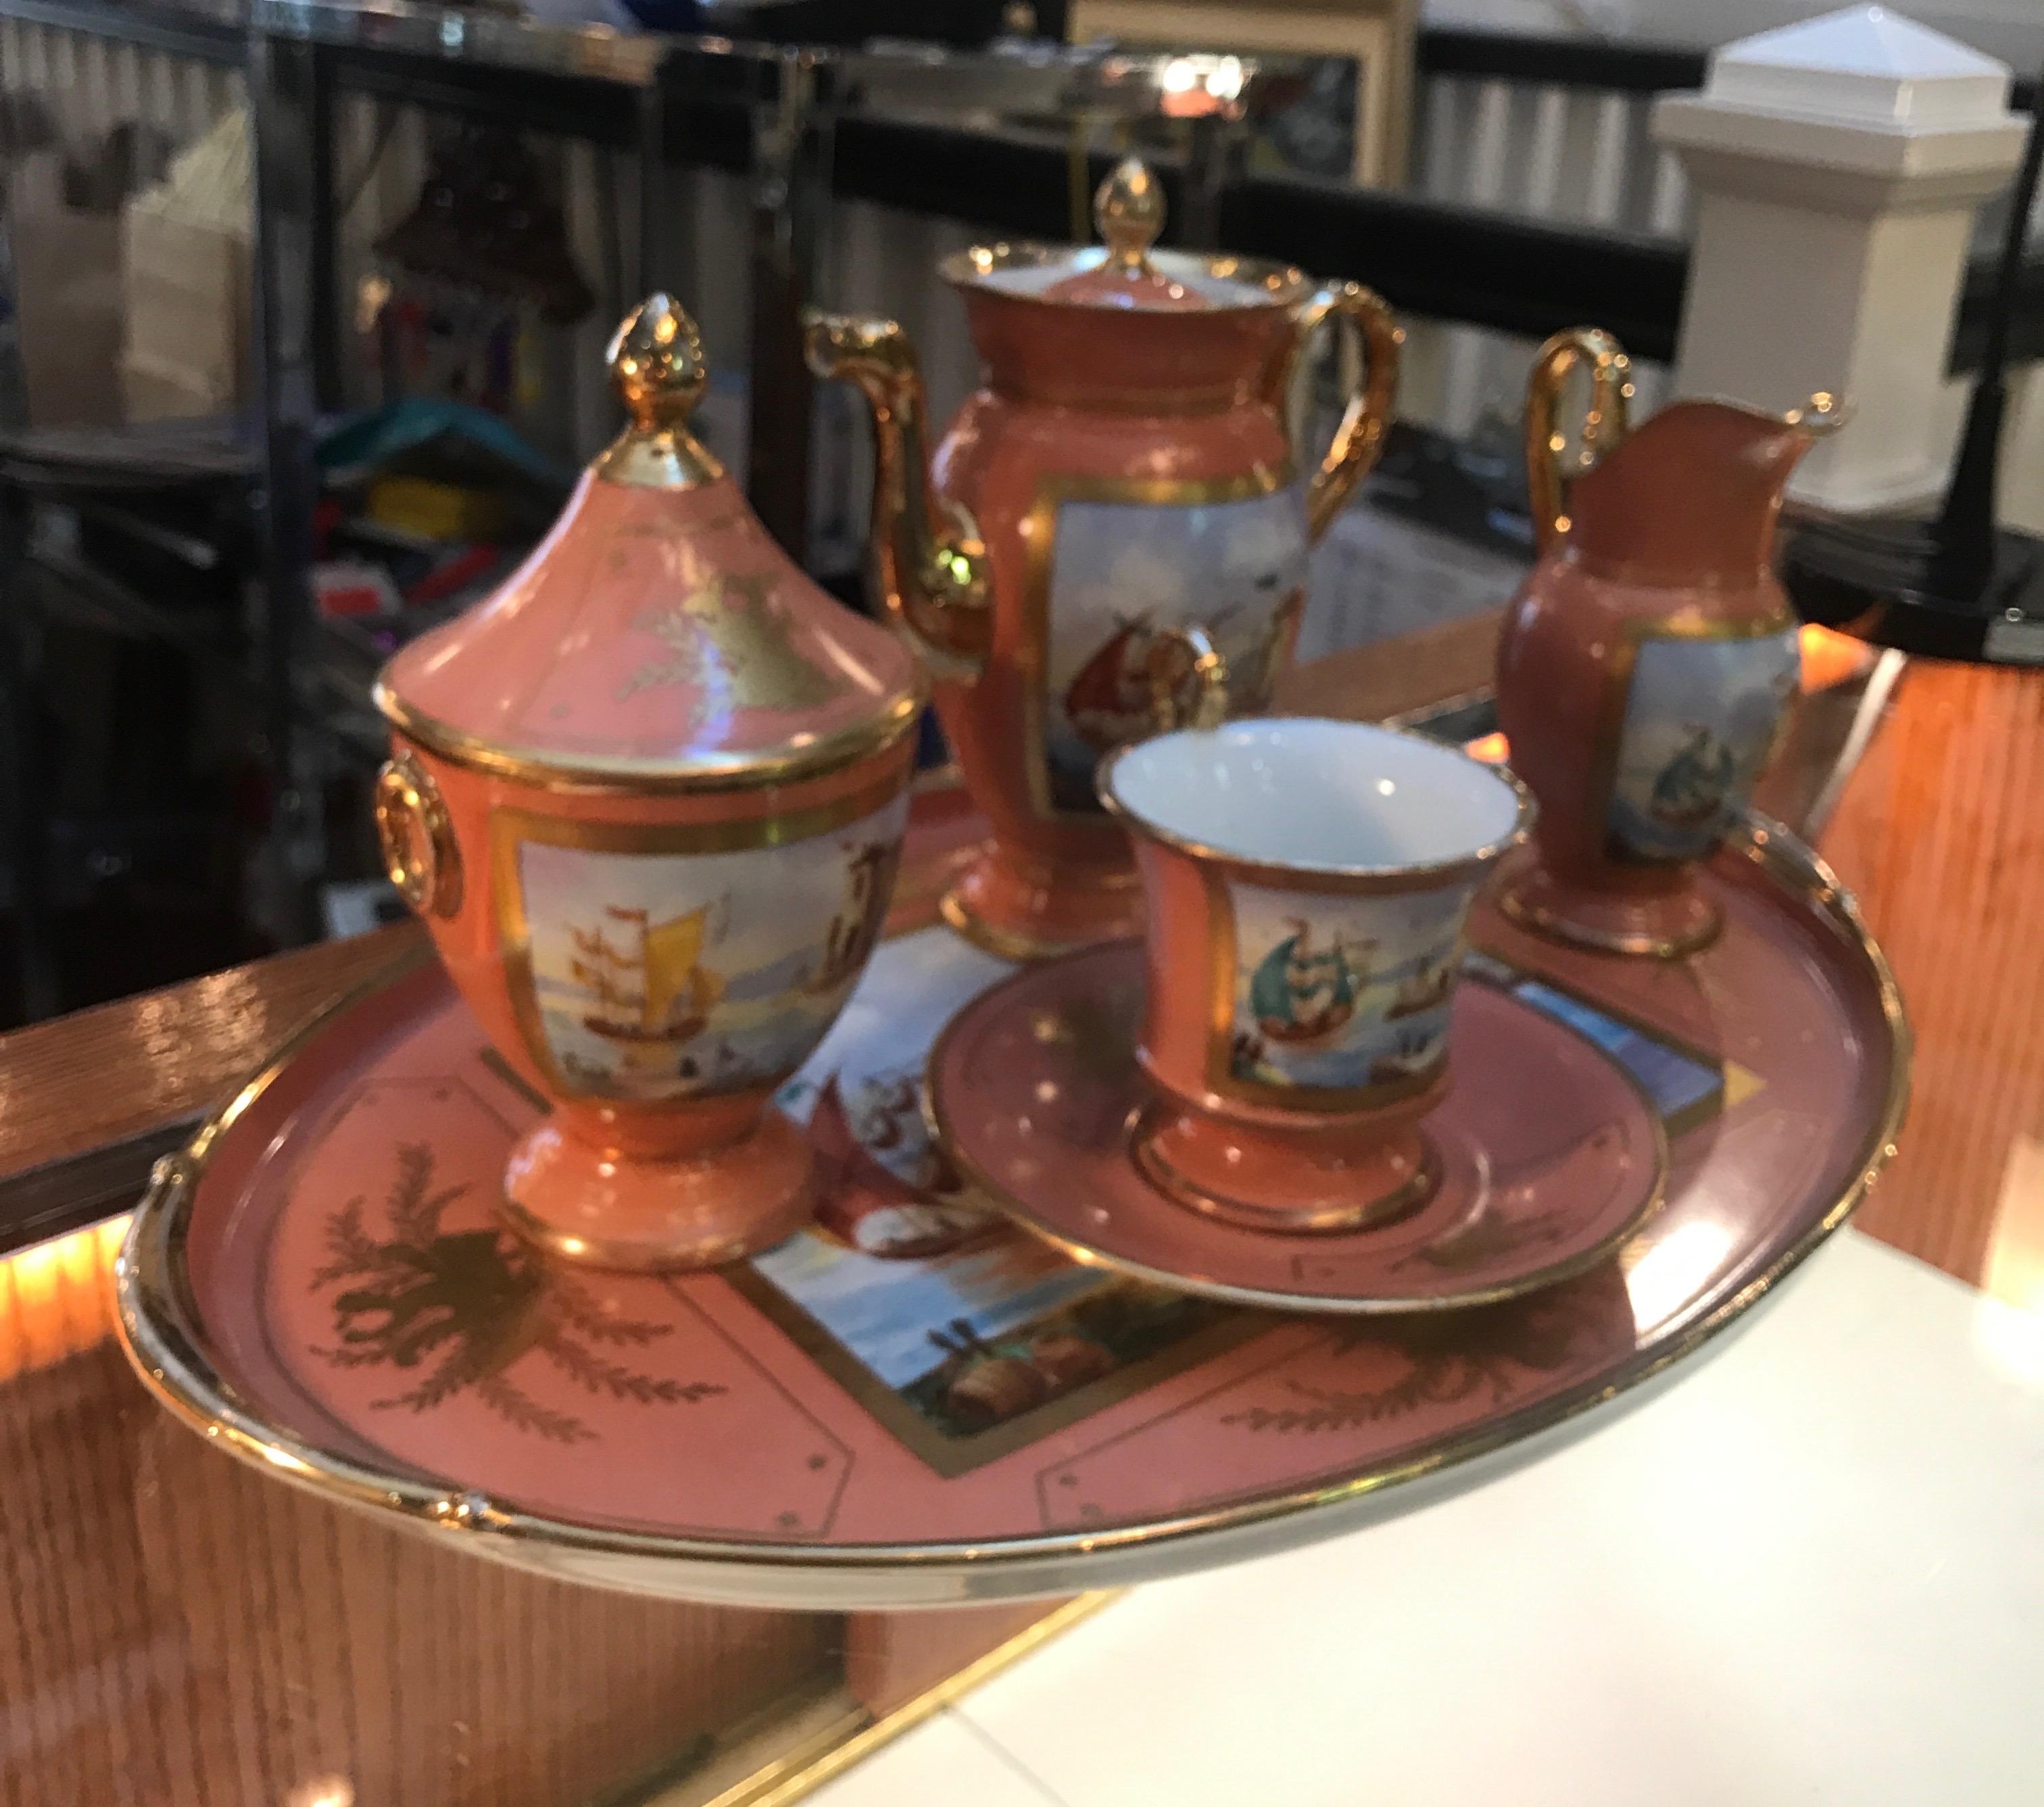 A beautifully hand painted porcelain tea set with an salmon color background. Each piece with a Venetian scene complete with tray. Tea pot, sugar bowl, creamer cup and saucer. The tray measures 16 inches by 10.5 inches.